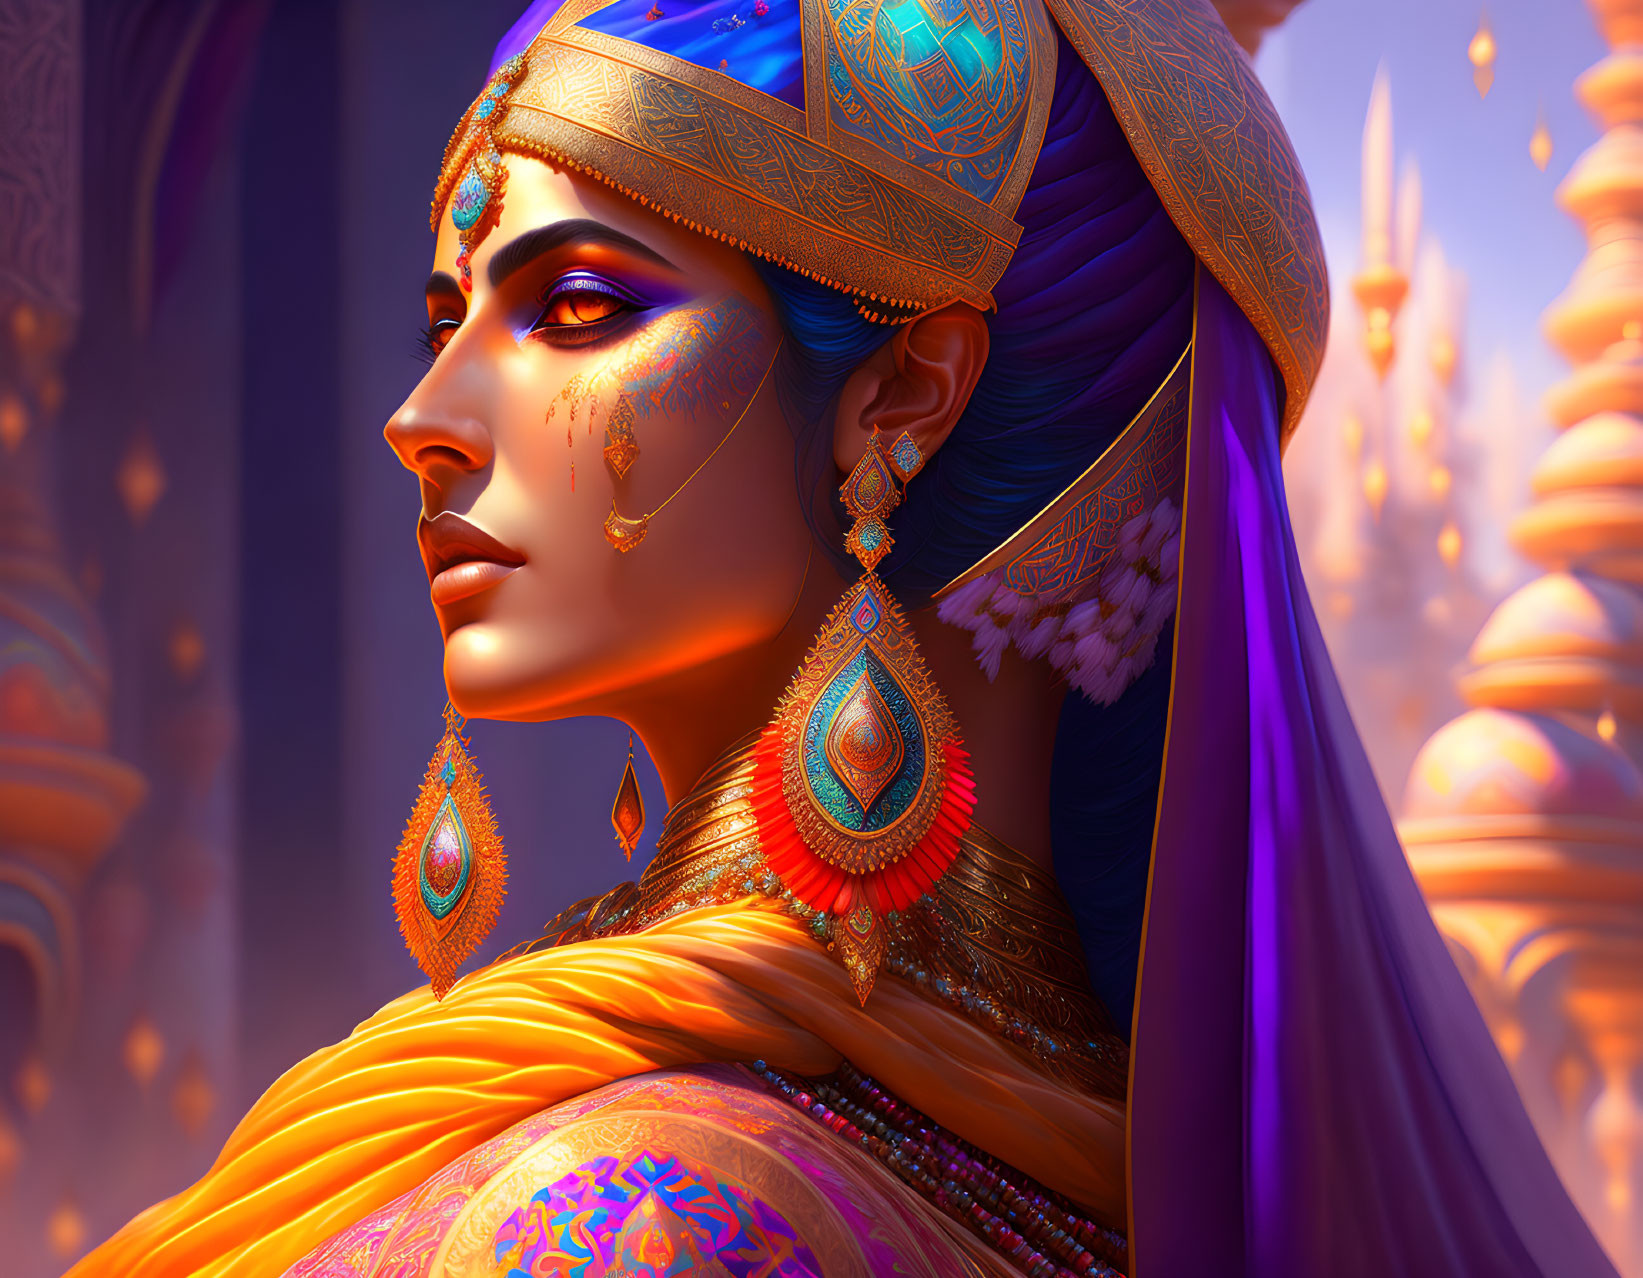 Regal Woman in Ornate Jewelry and Colorful Attire against Fantasy Palace.